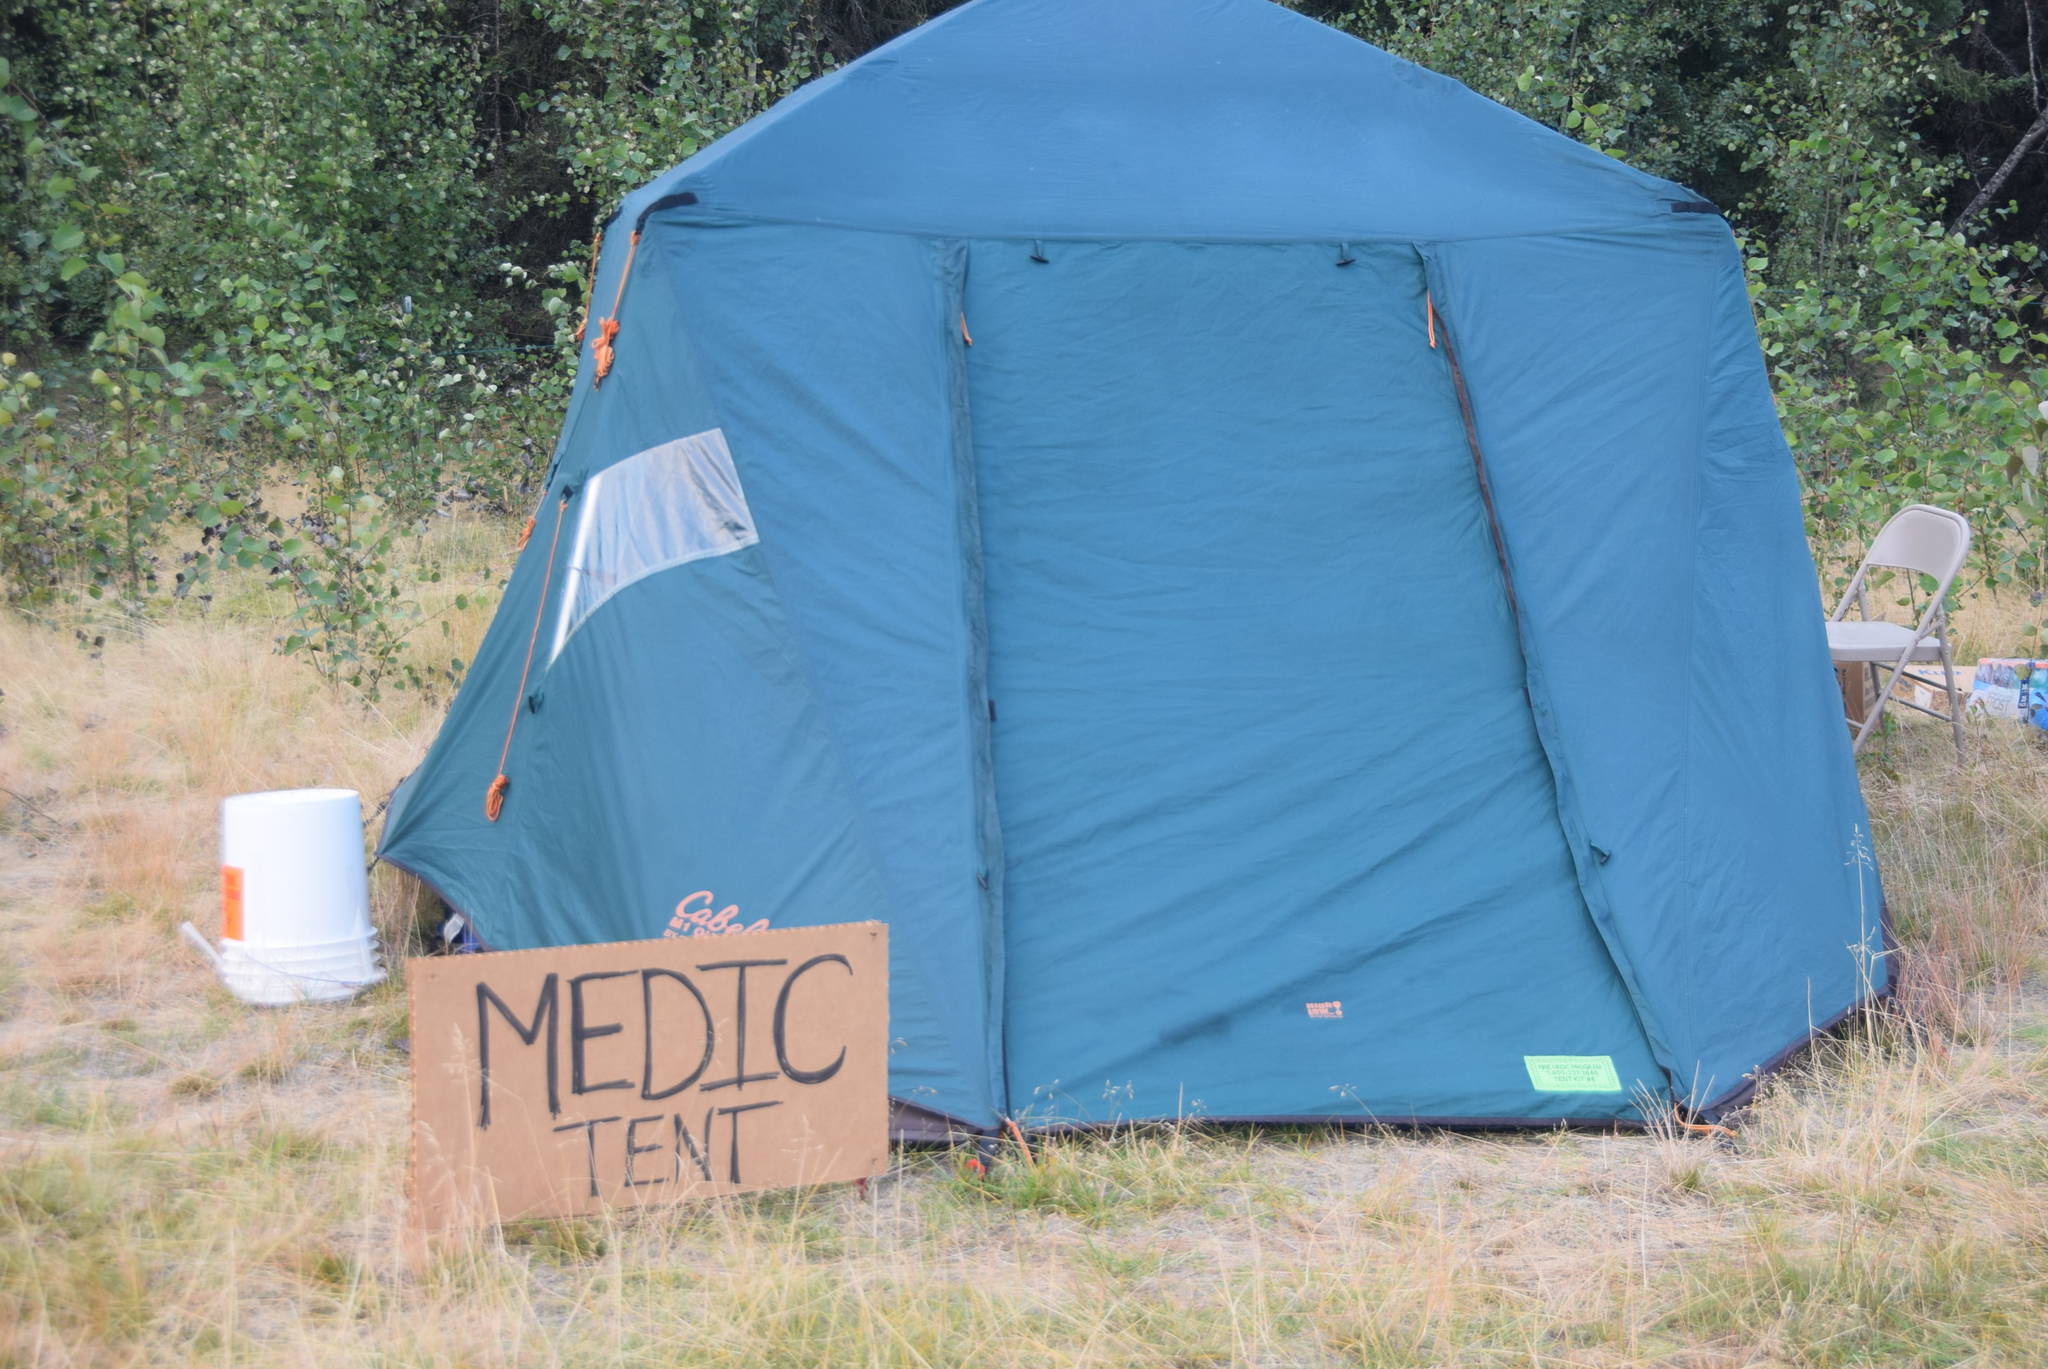 The Medic tent can be seen here at the Otter Creek Spike Camp located 5 miles north of Sterling, Alaska on Aug. 30, 2019. (Photo by Brian Mazurek/Peninsula Clarion)